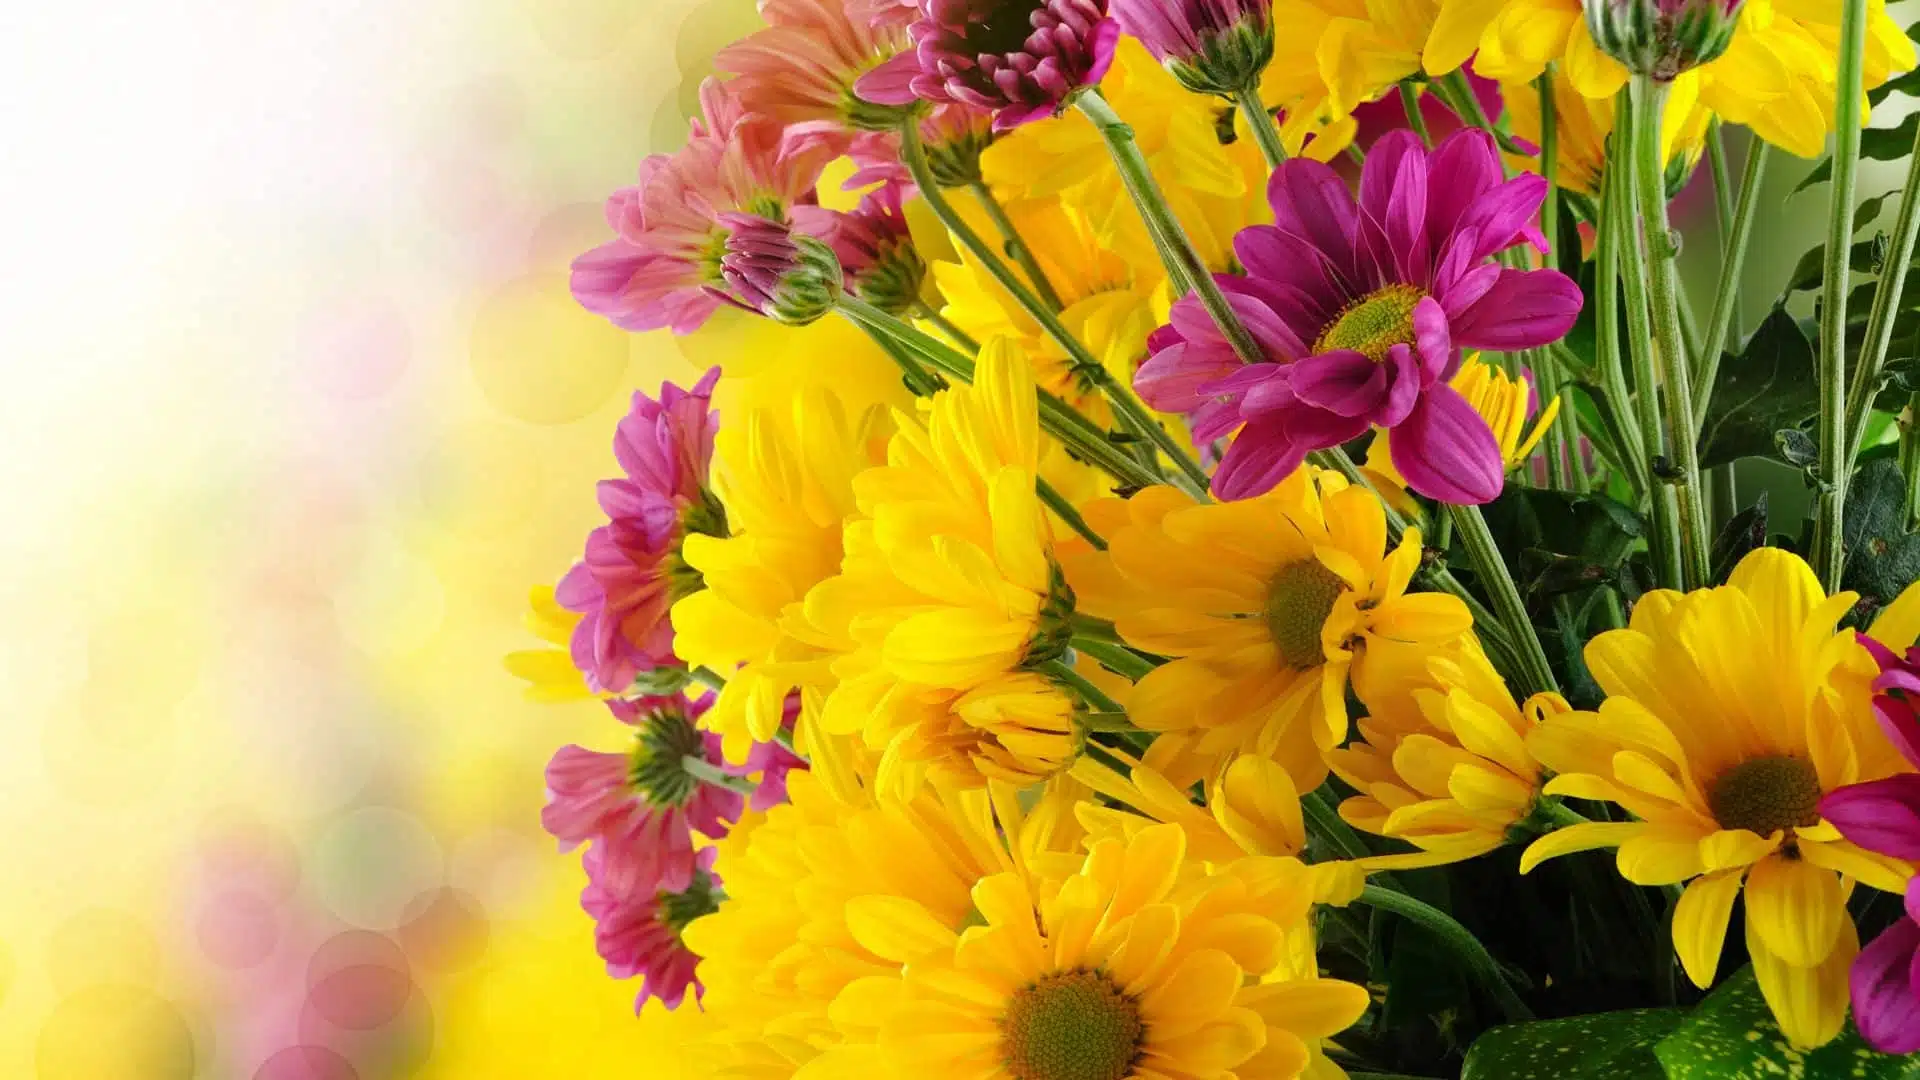 Beautiful-flowers-bouquet-with-yellow-and-purple-green-flower-petals-pictures-HD-Wallpaper-for-your-mobile-phone-tablet-and-laptop-computer-6000x3750-1920x1080